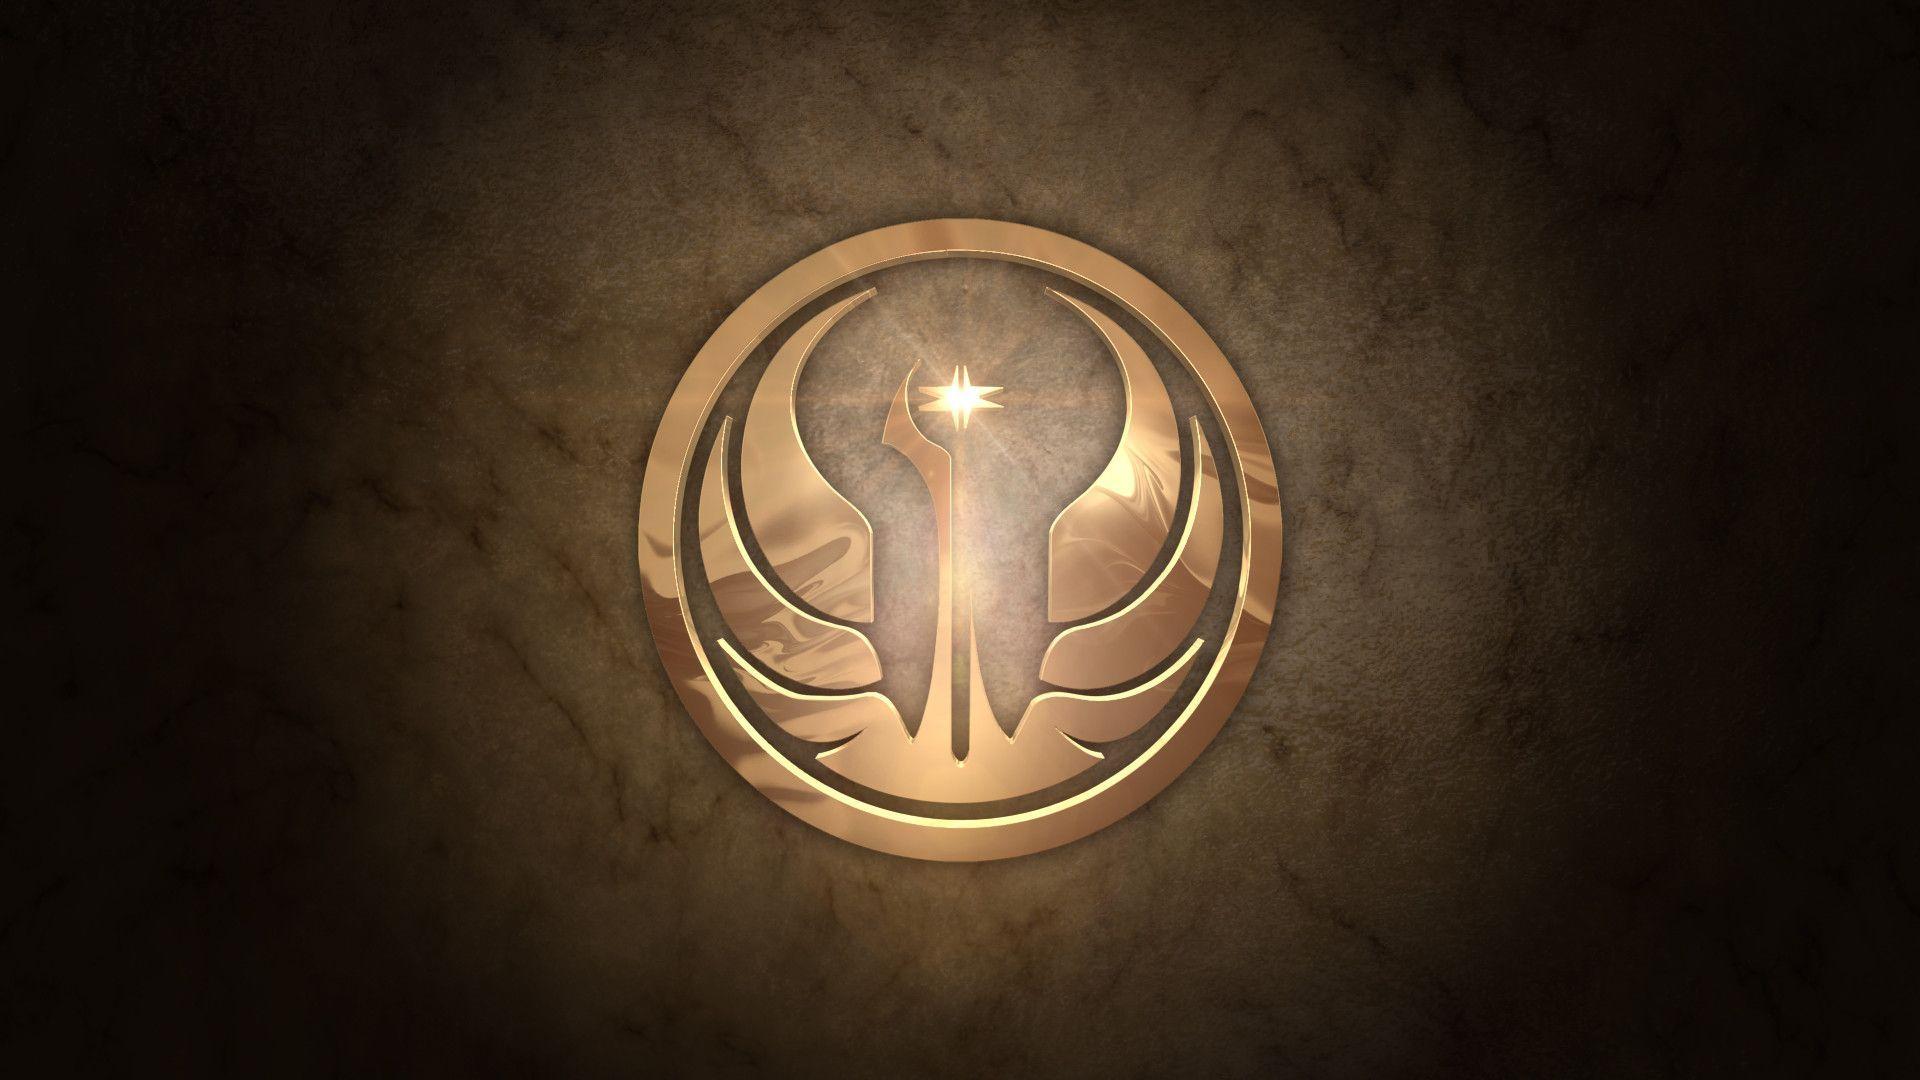 Star Wars: The Old Republic Wallpapers - Wallpaper Cave